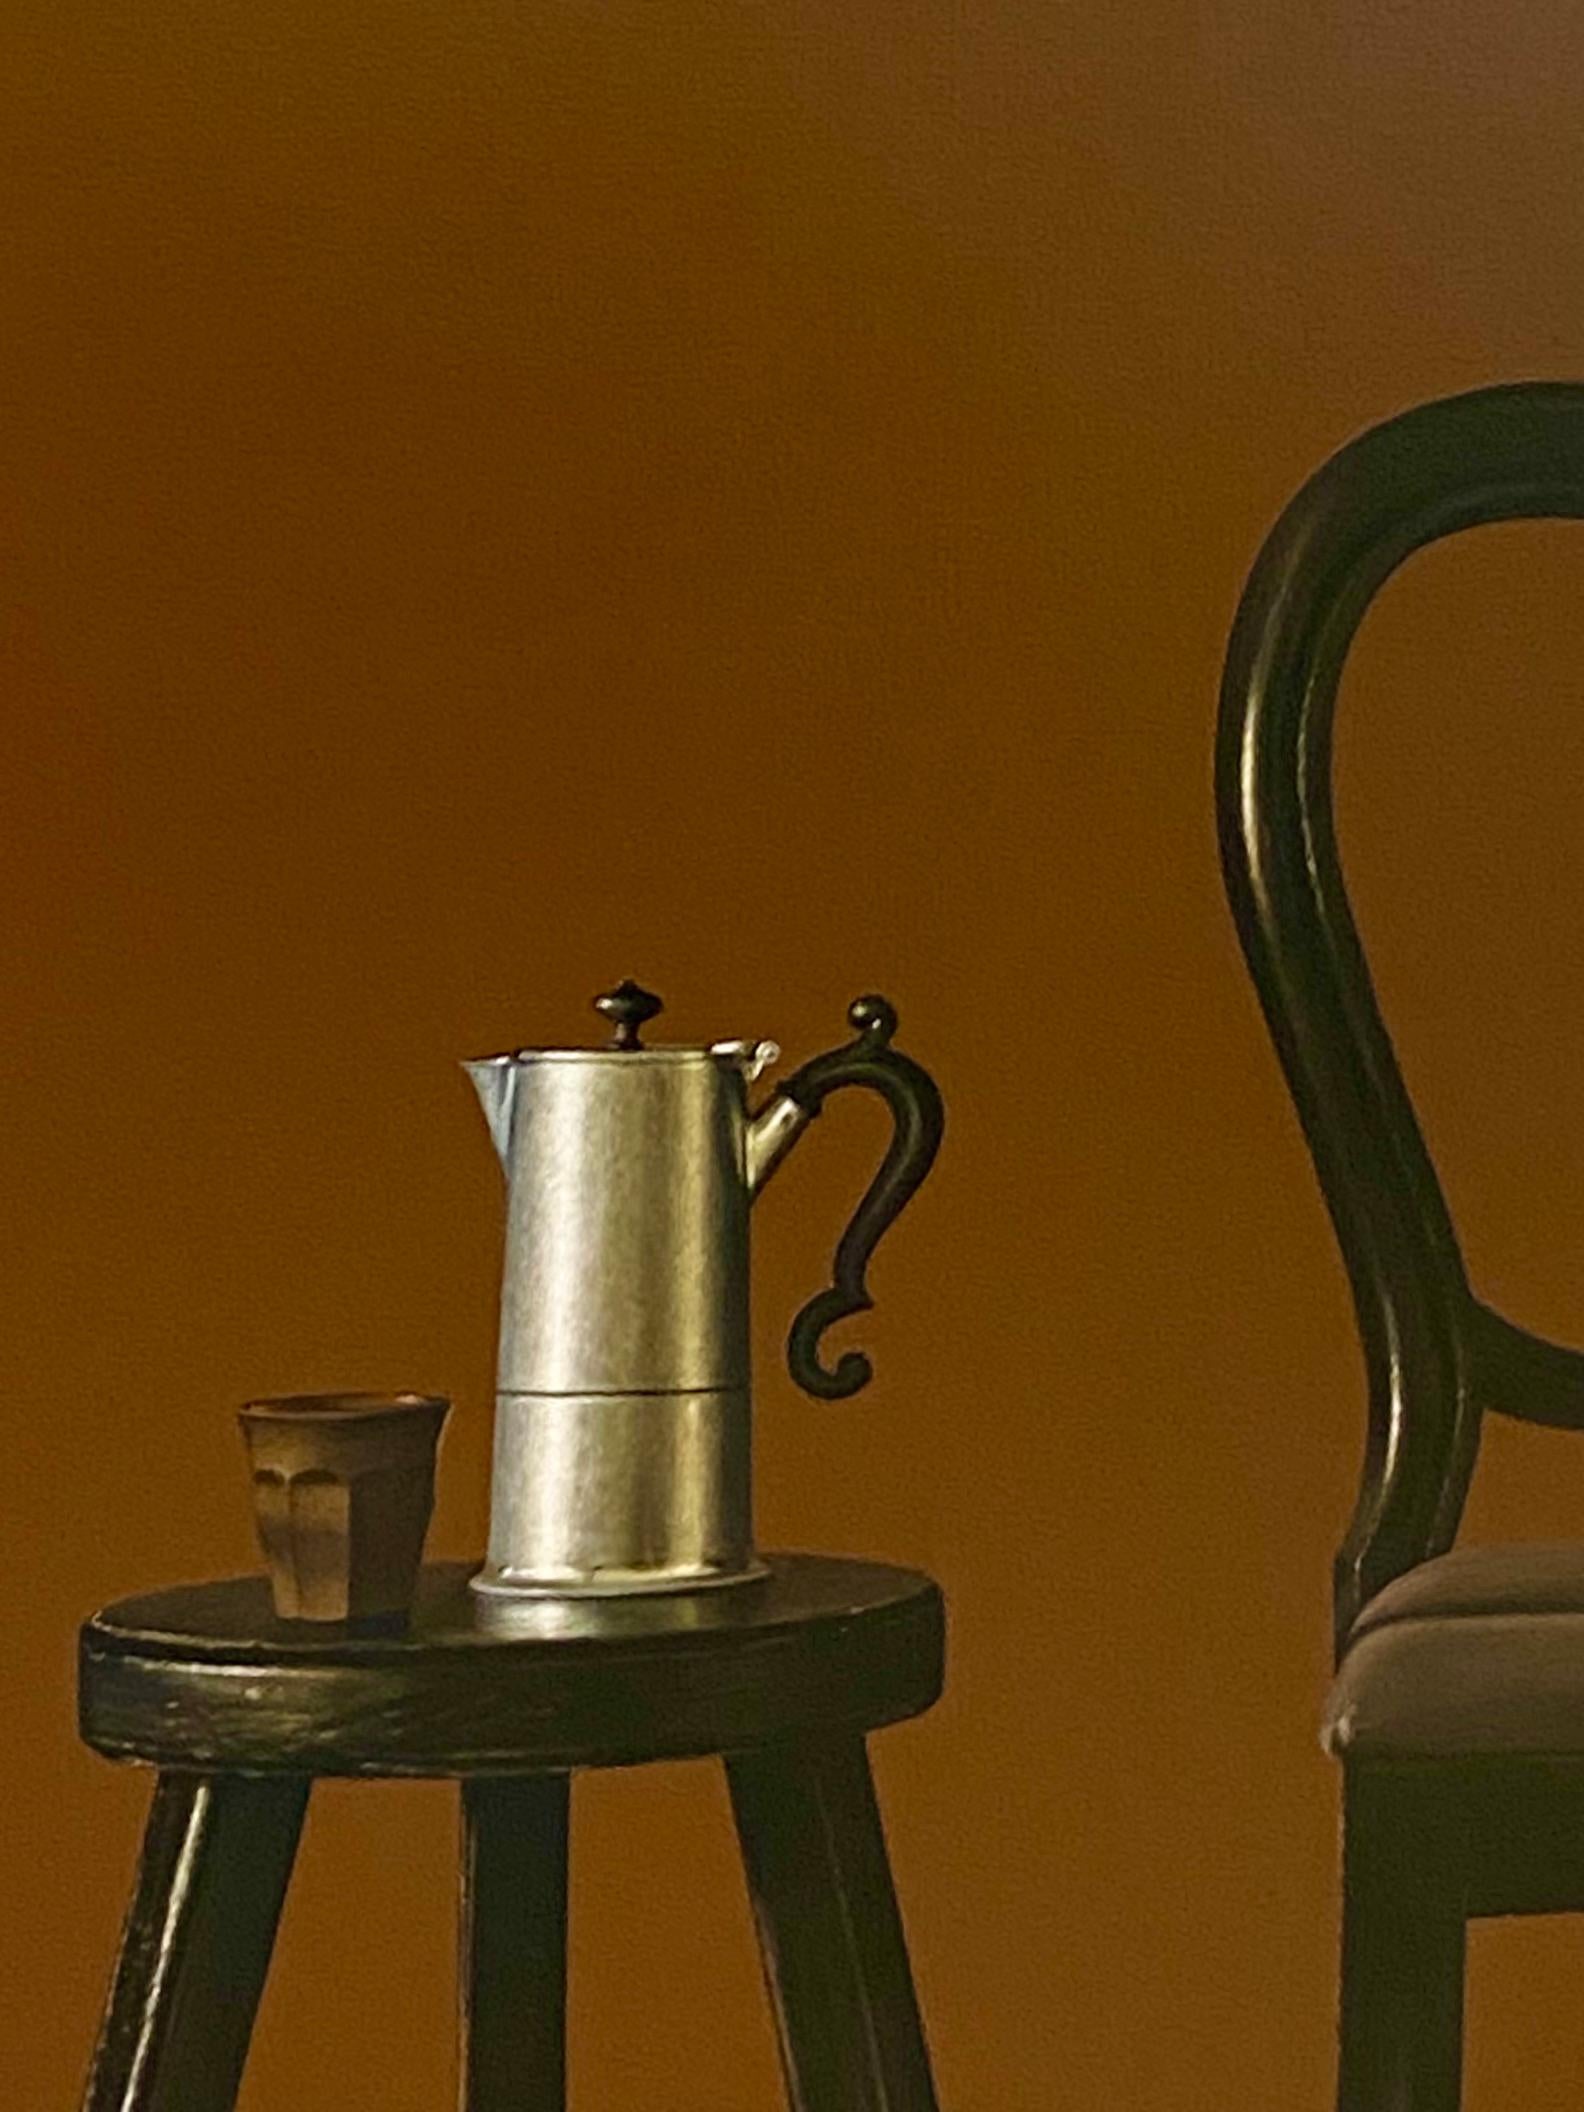 Chair with Percolator-21st Contemporary Dutch Still-life painting with Furniture 1